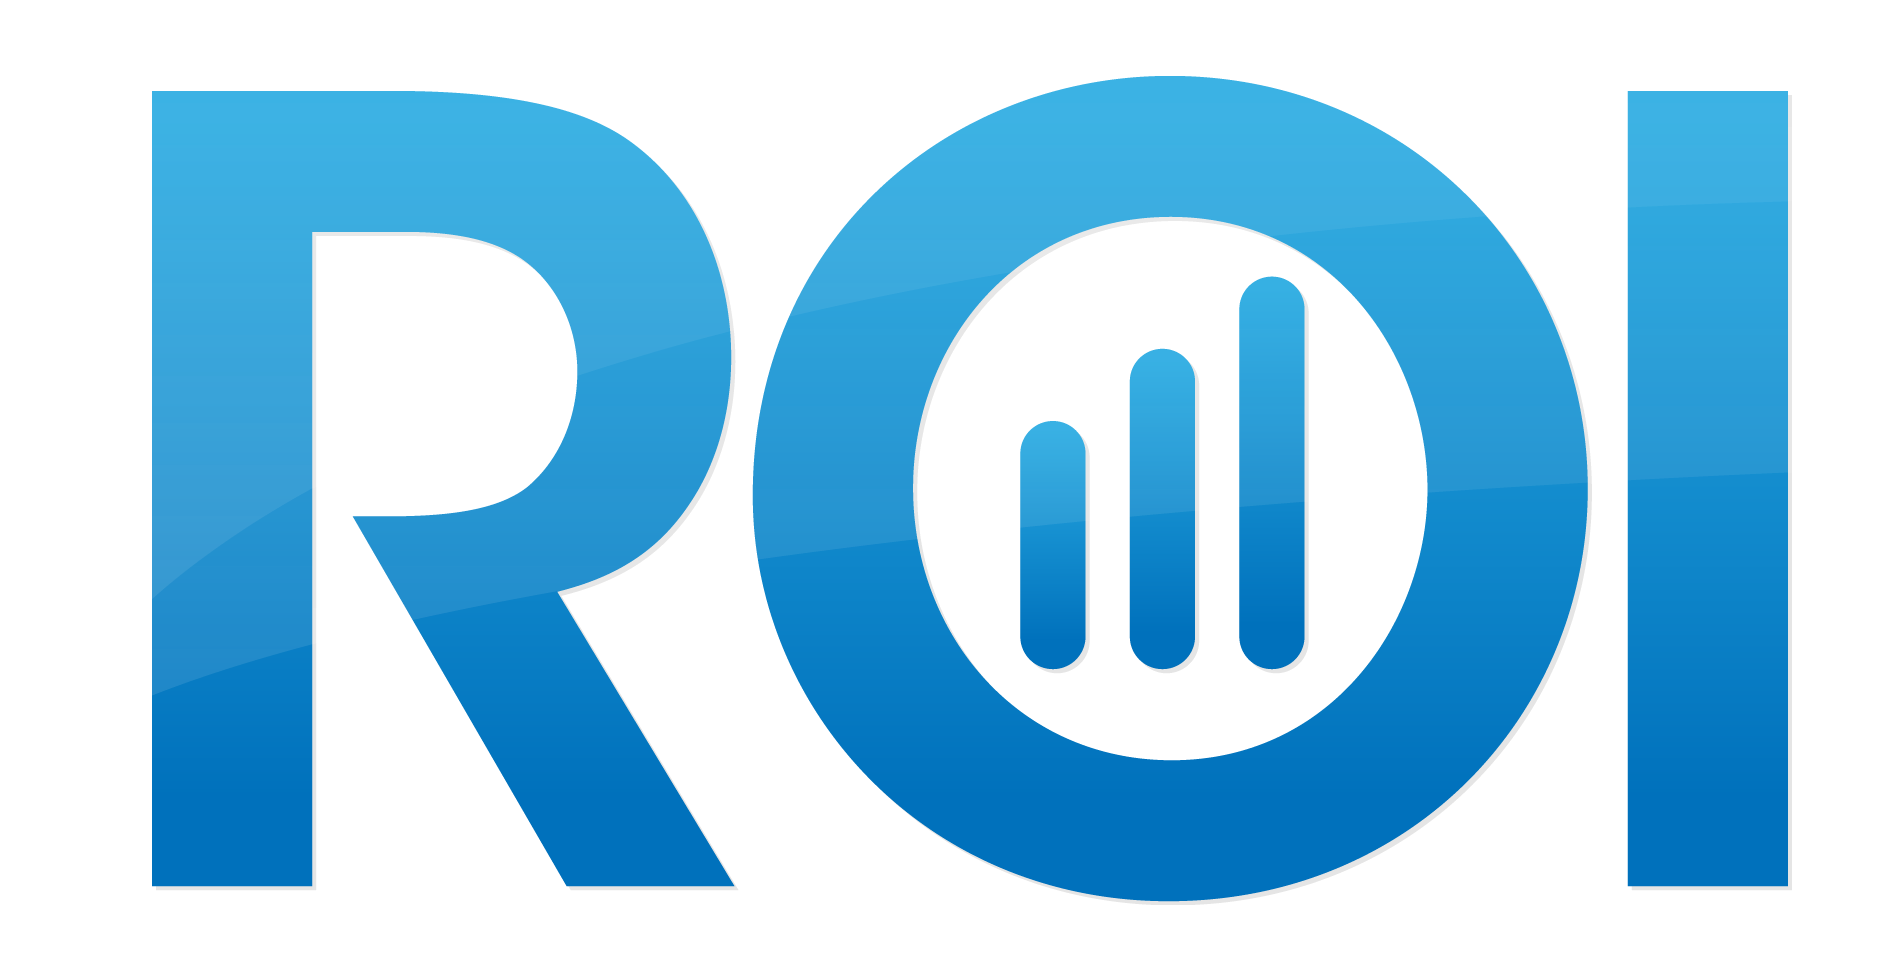 Roi Text Logo PNG Image in Transparent Return on Investment  pngteam.com